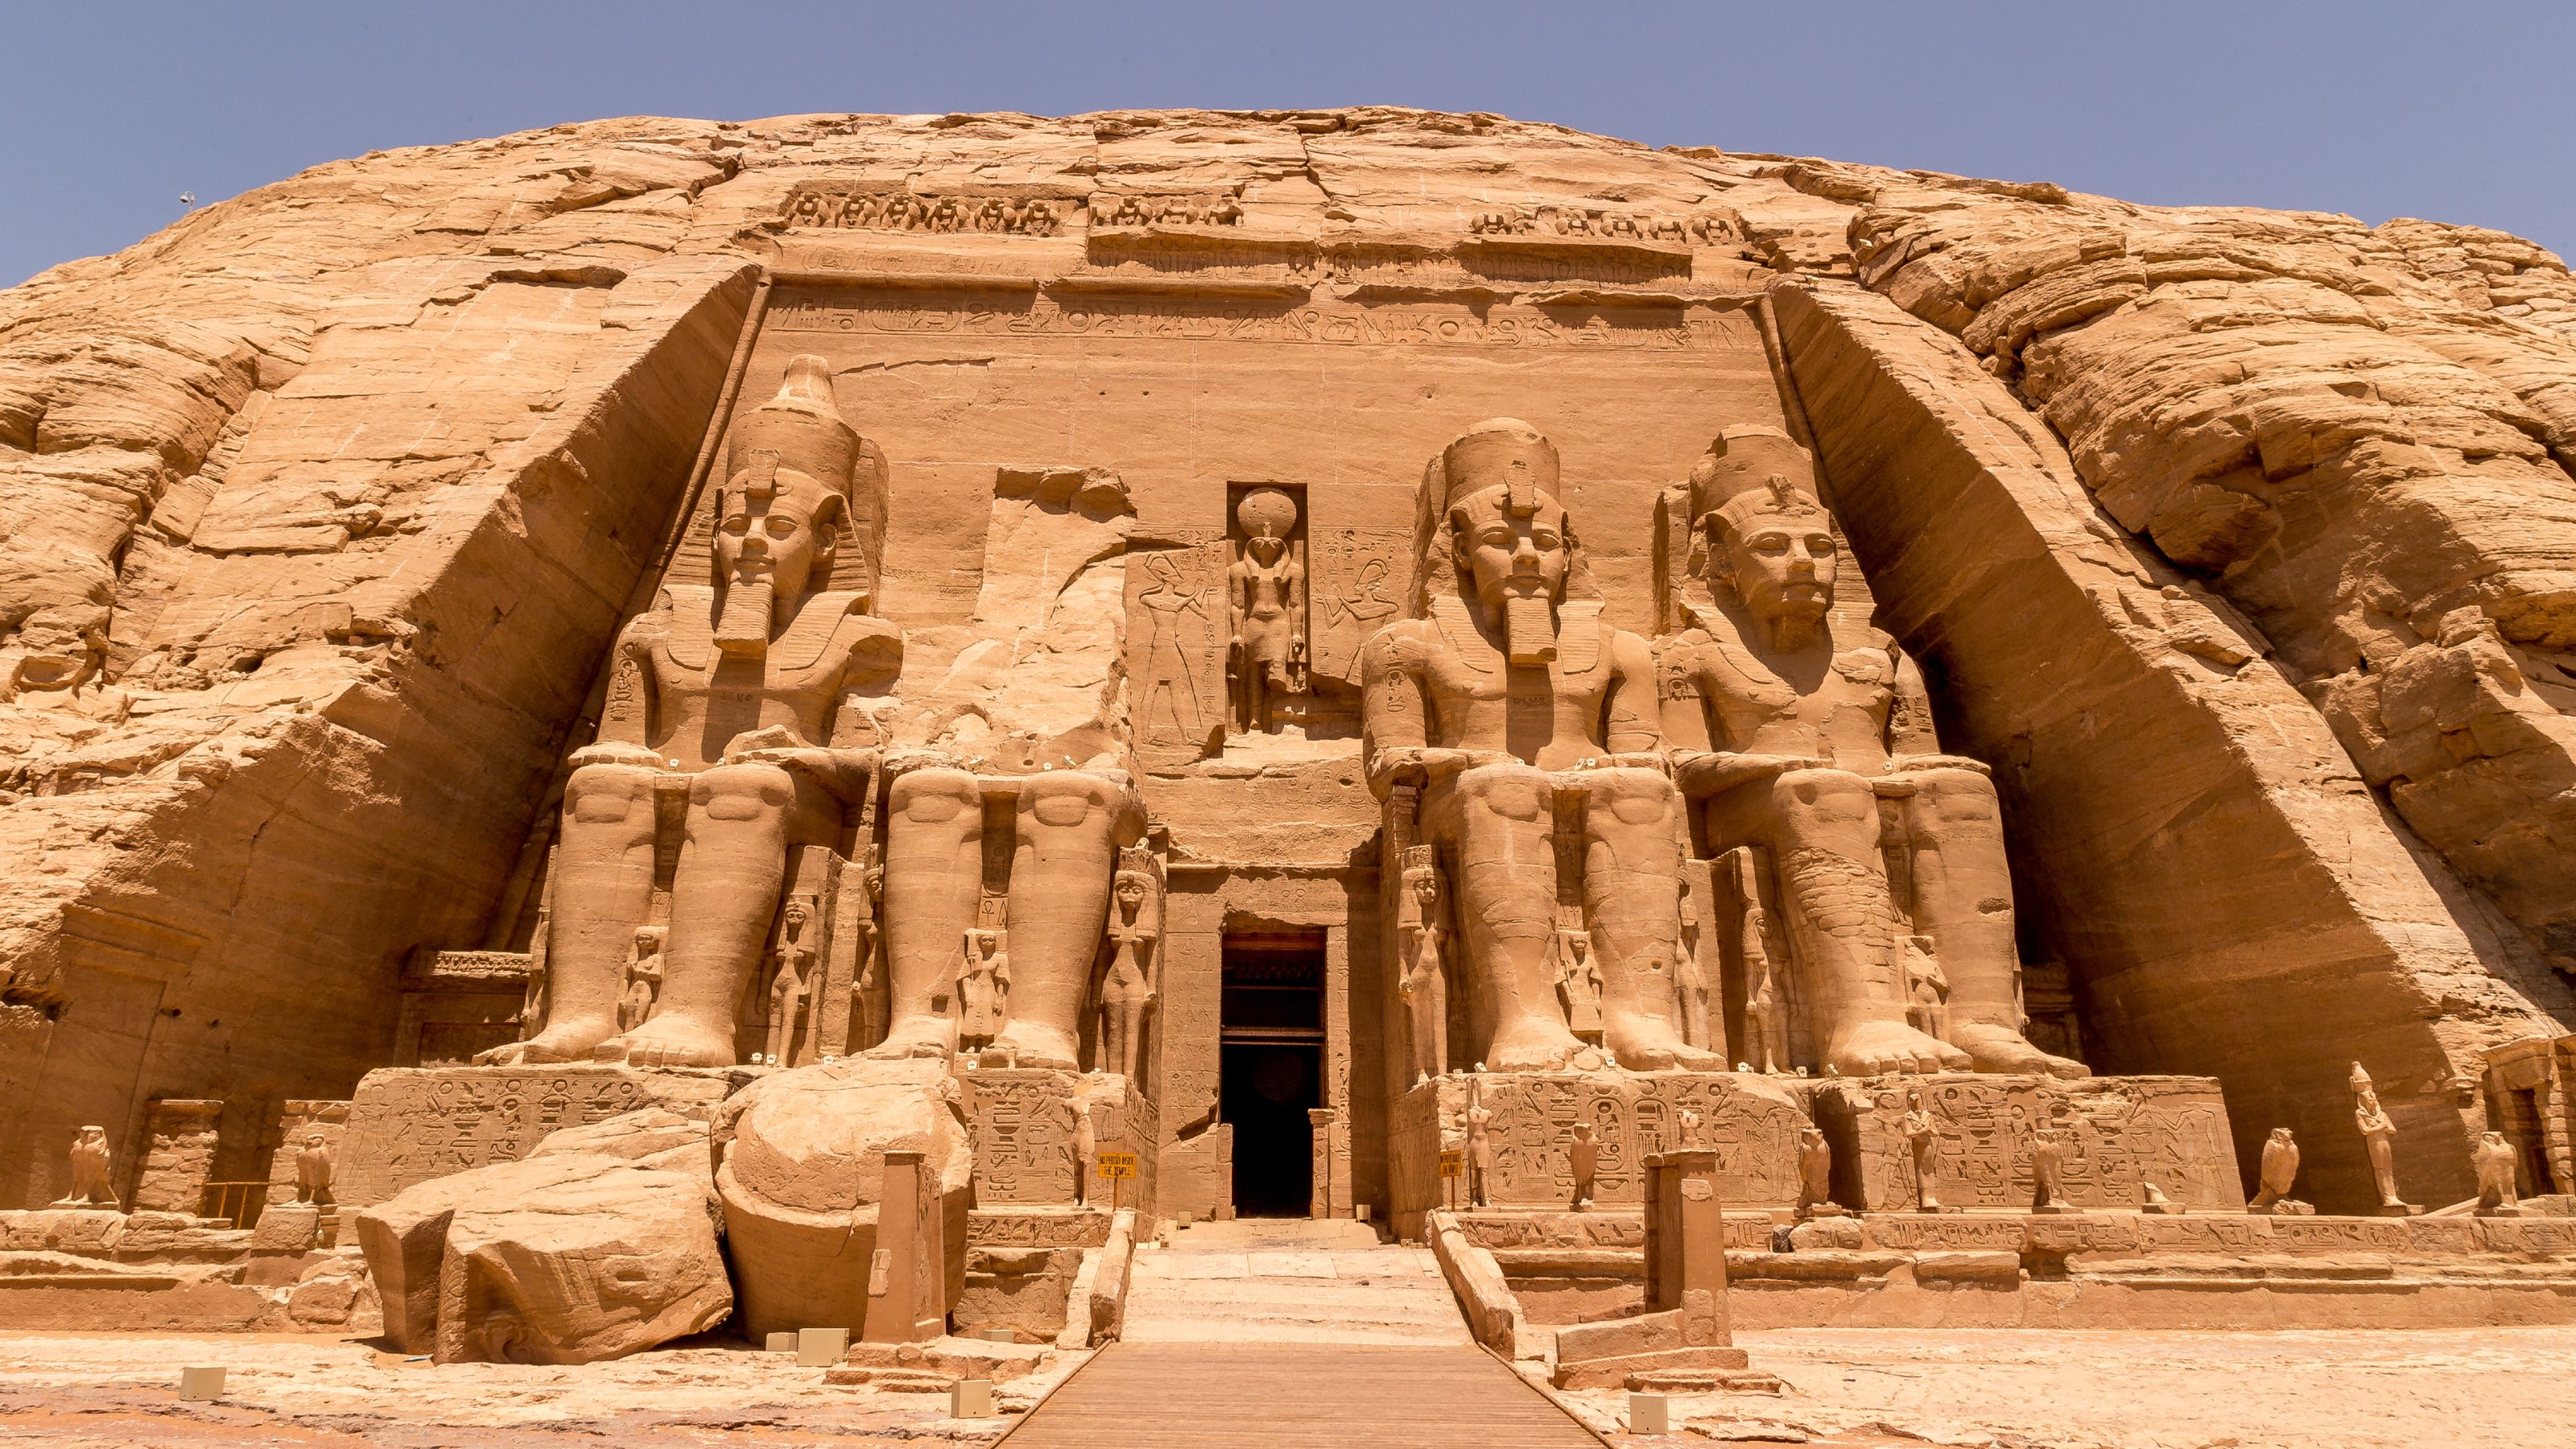 Military Architecture of Ancient Egypt